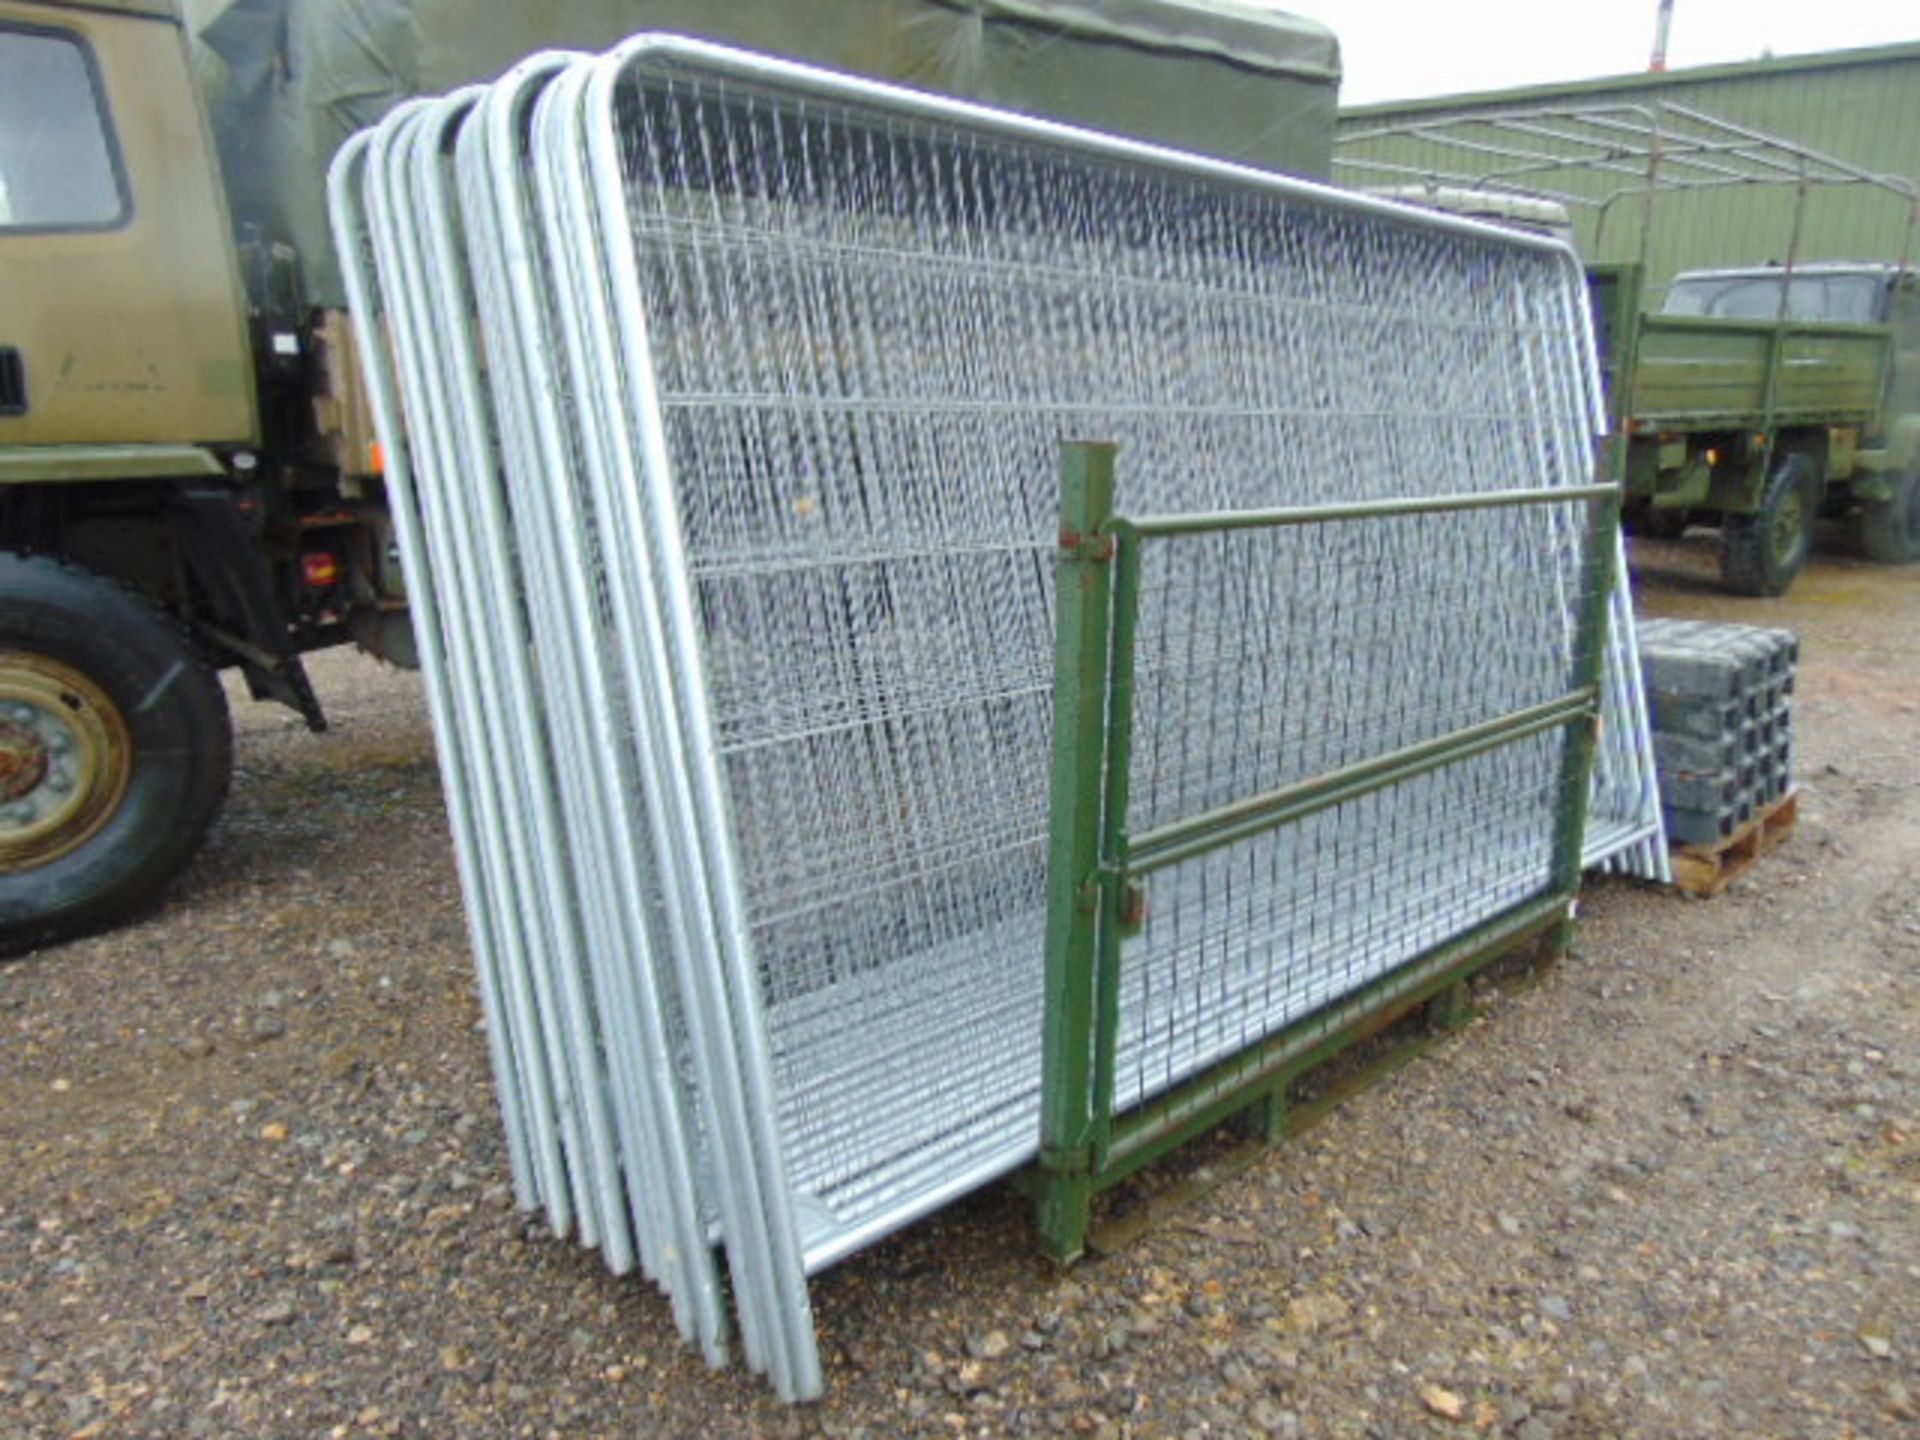 20 x Temporary Heras Security Fence Panels, 20 x Rubber Block Feet and 20 x Anti Tamper Couplers - Image 3 of 7